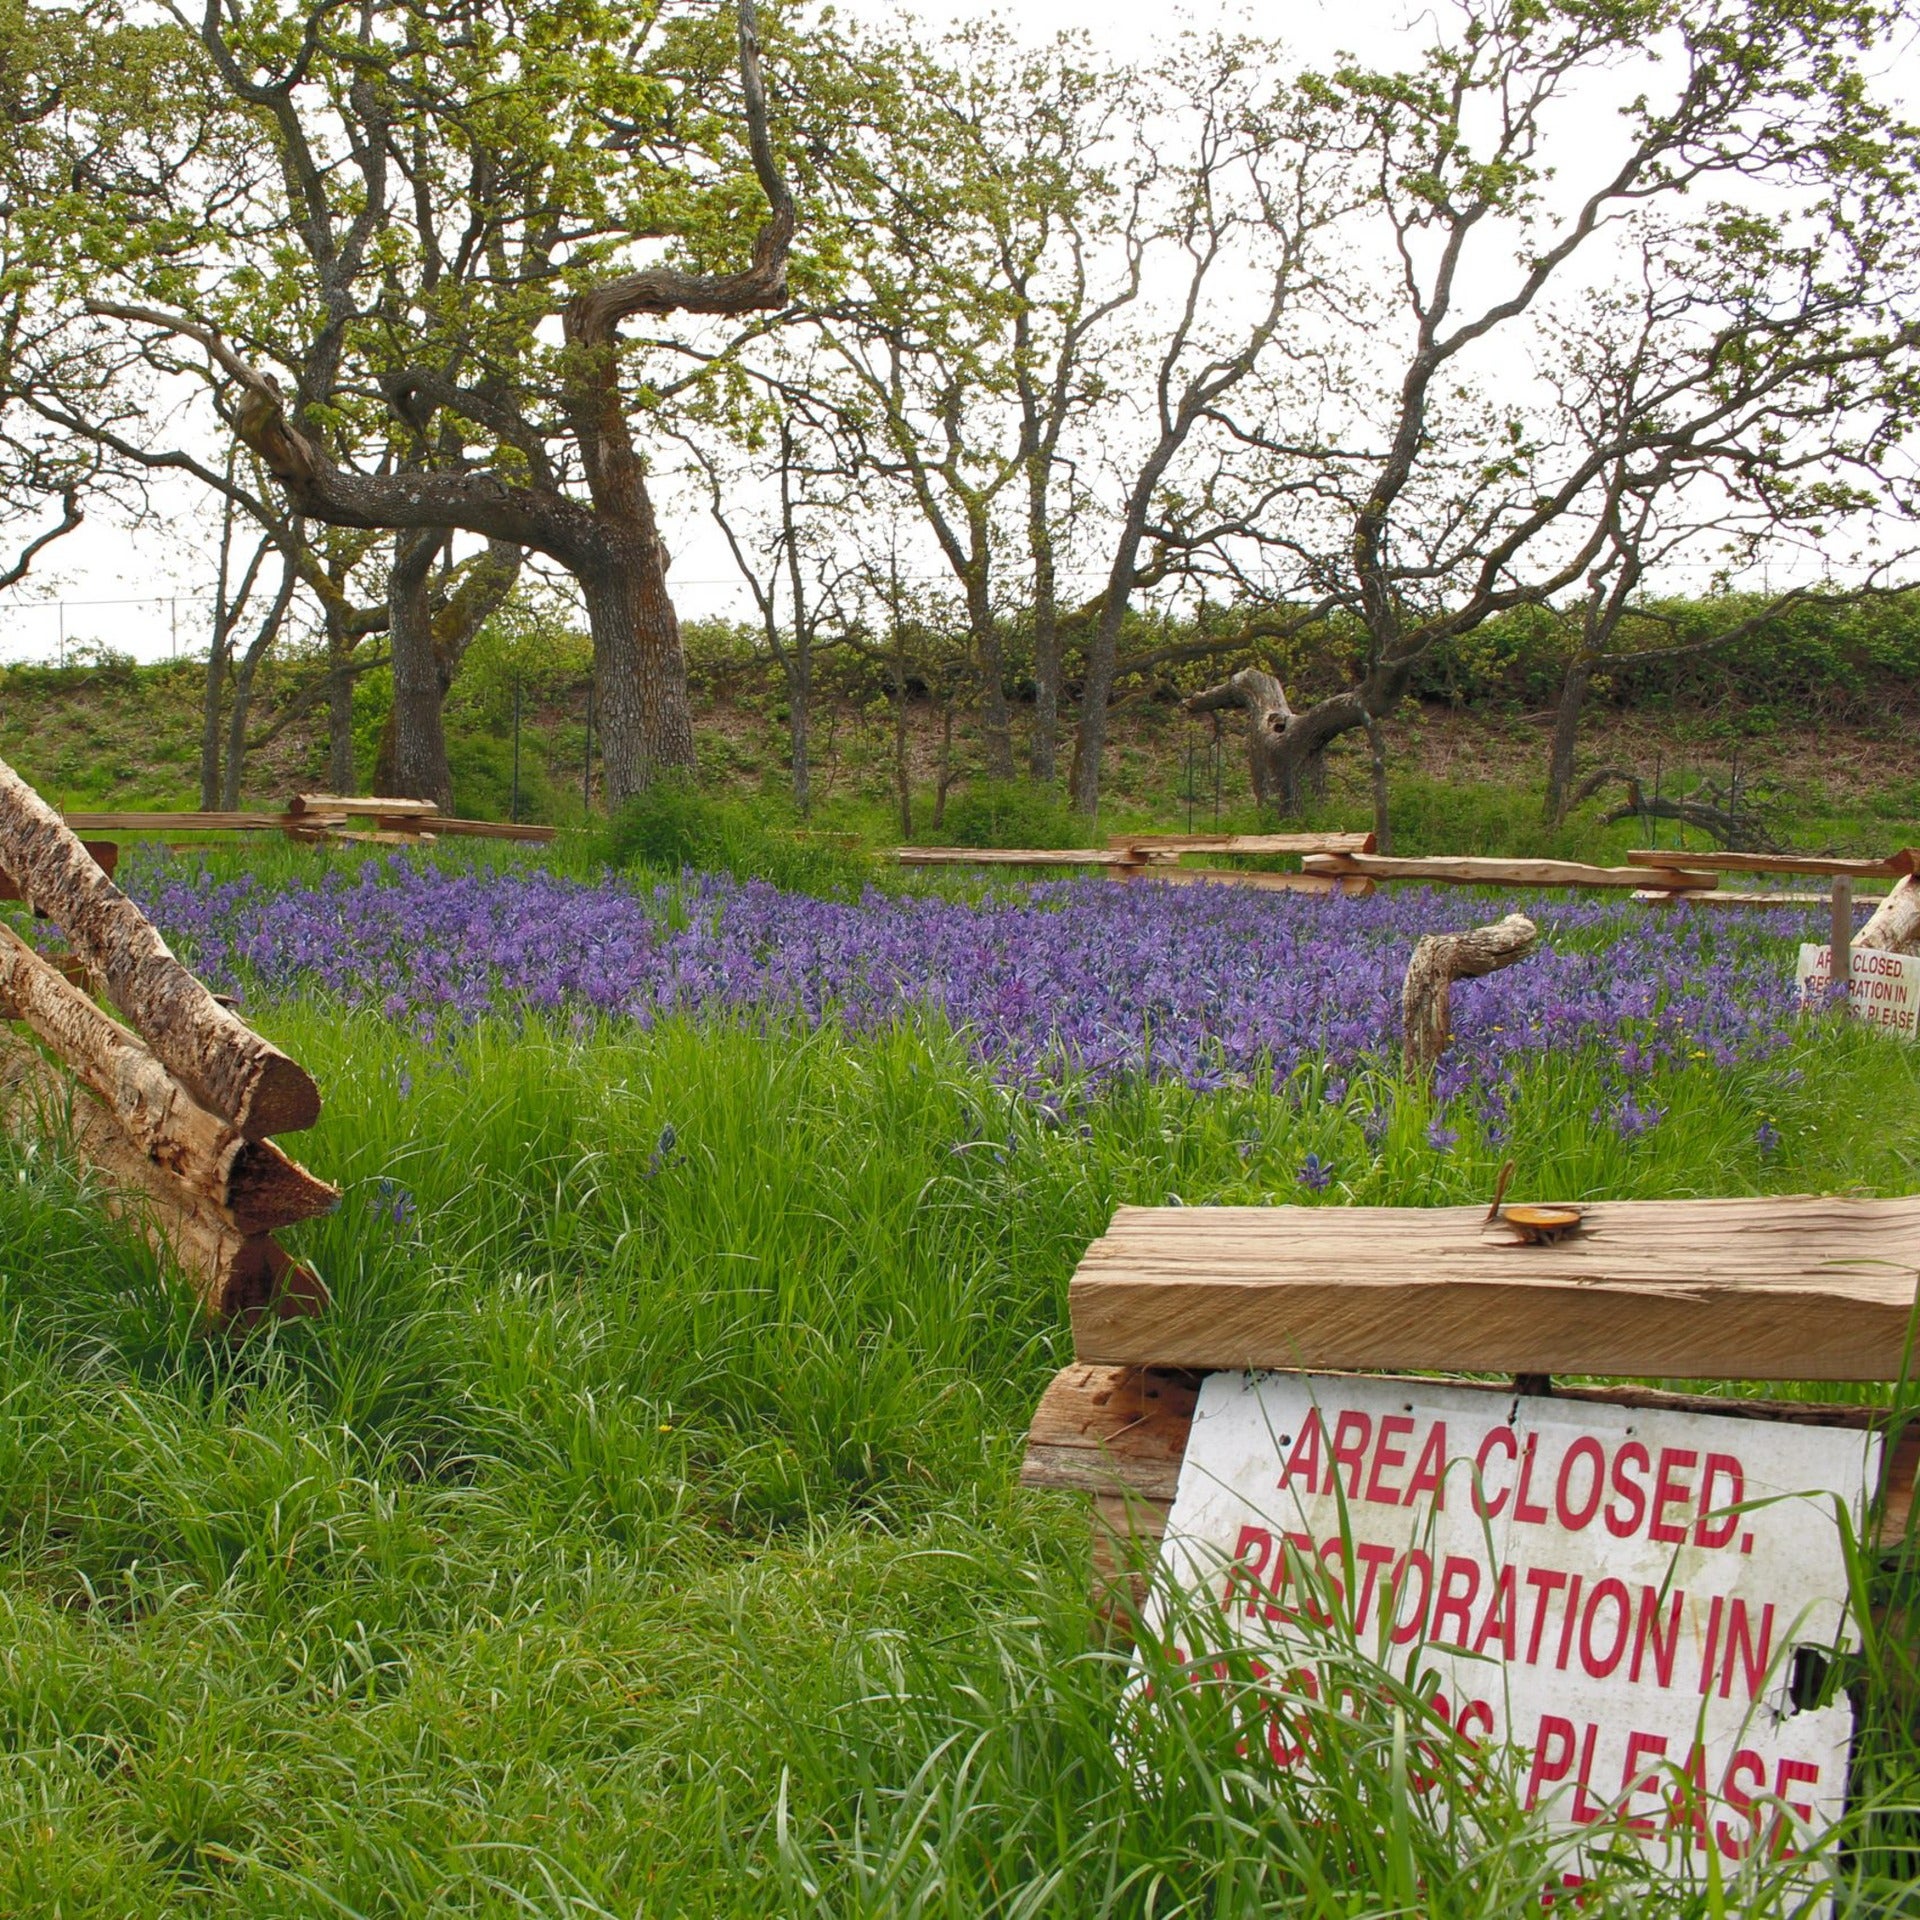 Clearing with a sign "Area closed restoration in process please" and lavender flowers in the distance